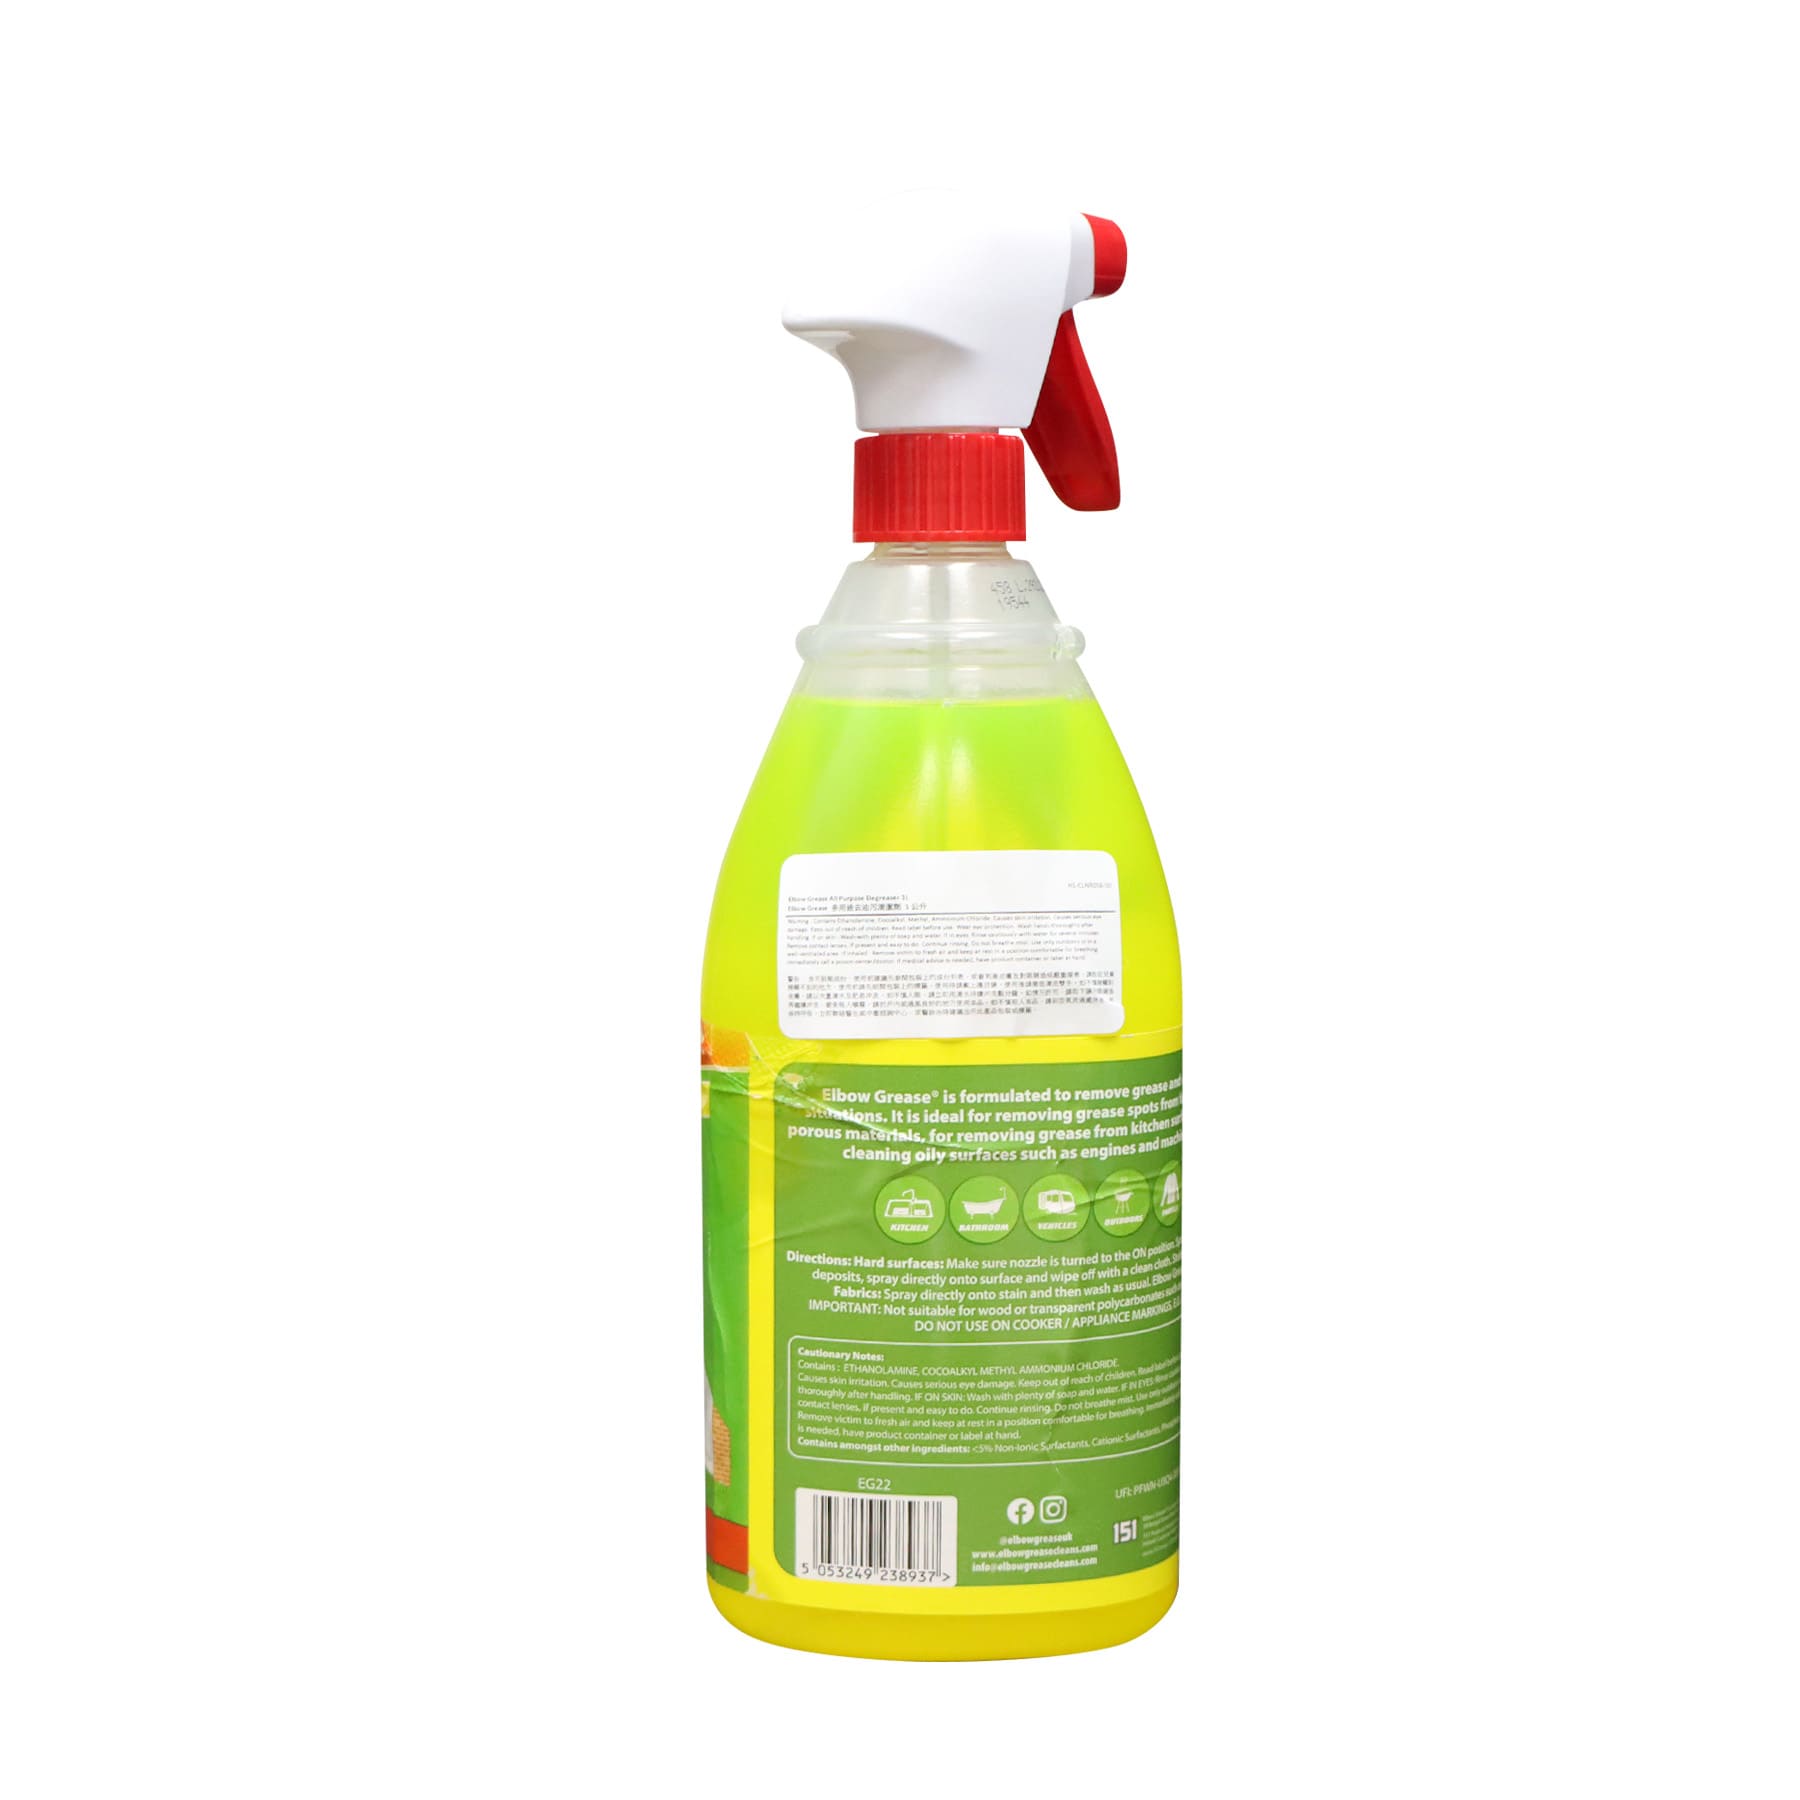 Elbow Grease All Purpose Degreaser 1L